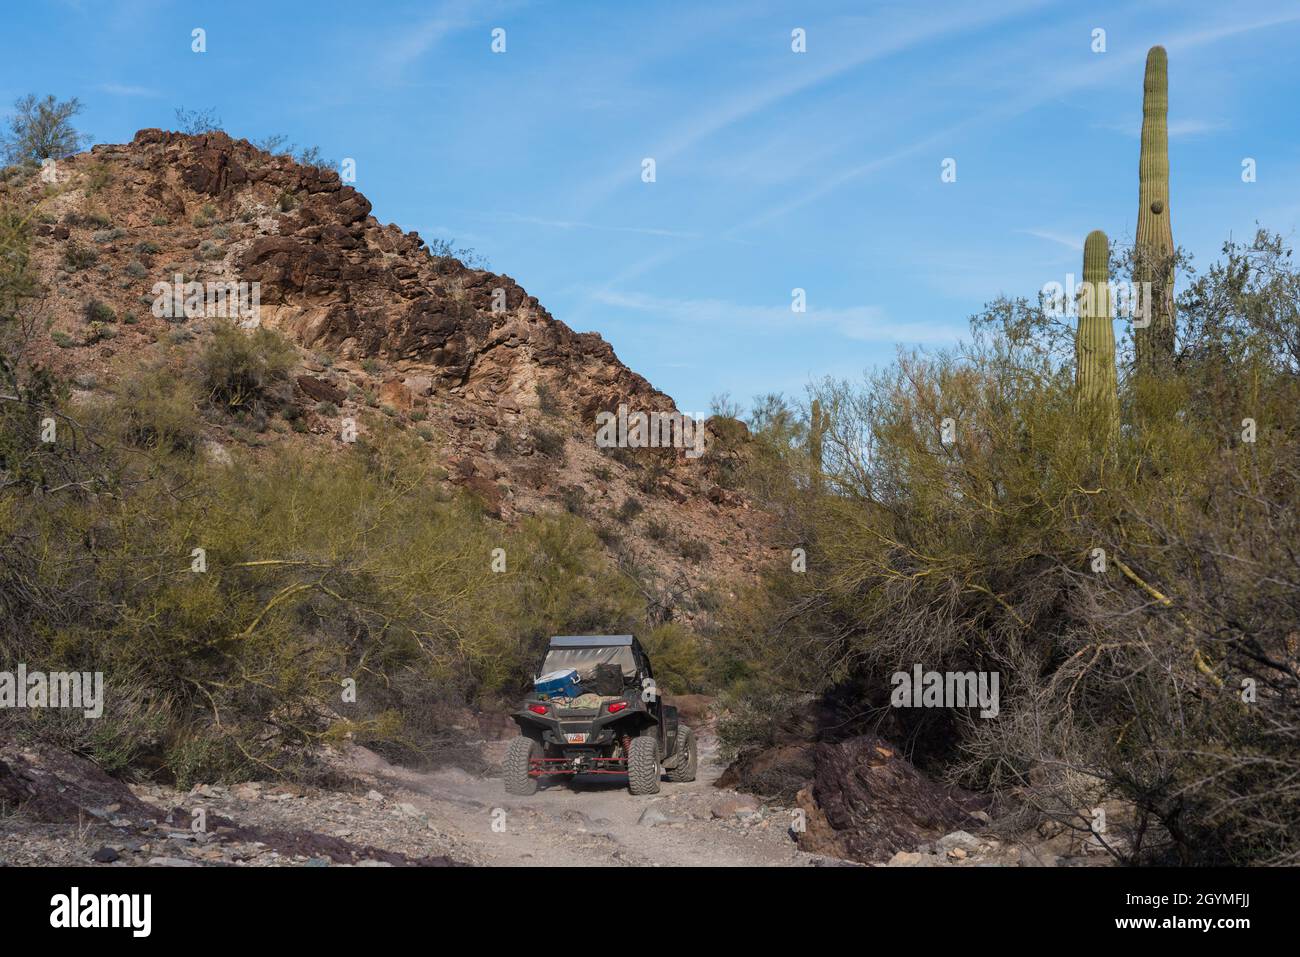 Following a 4WD UTV off-road vehicle on the Dripping Springs Trail in the Plomosa Mountains near Quartzsite, Arizona. Stock Photo